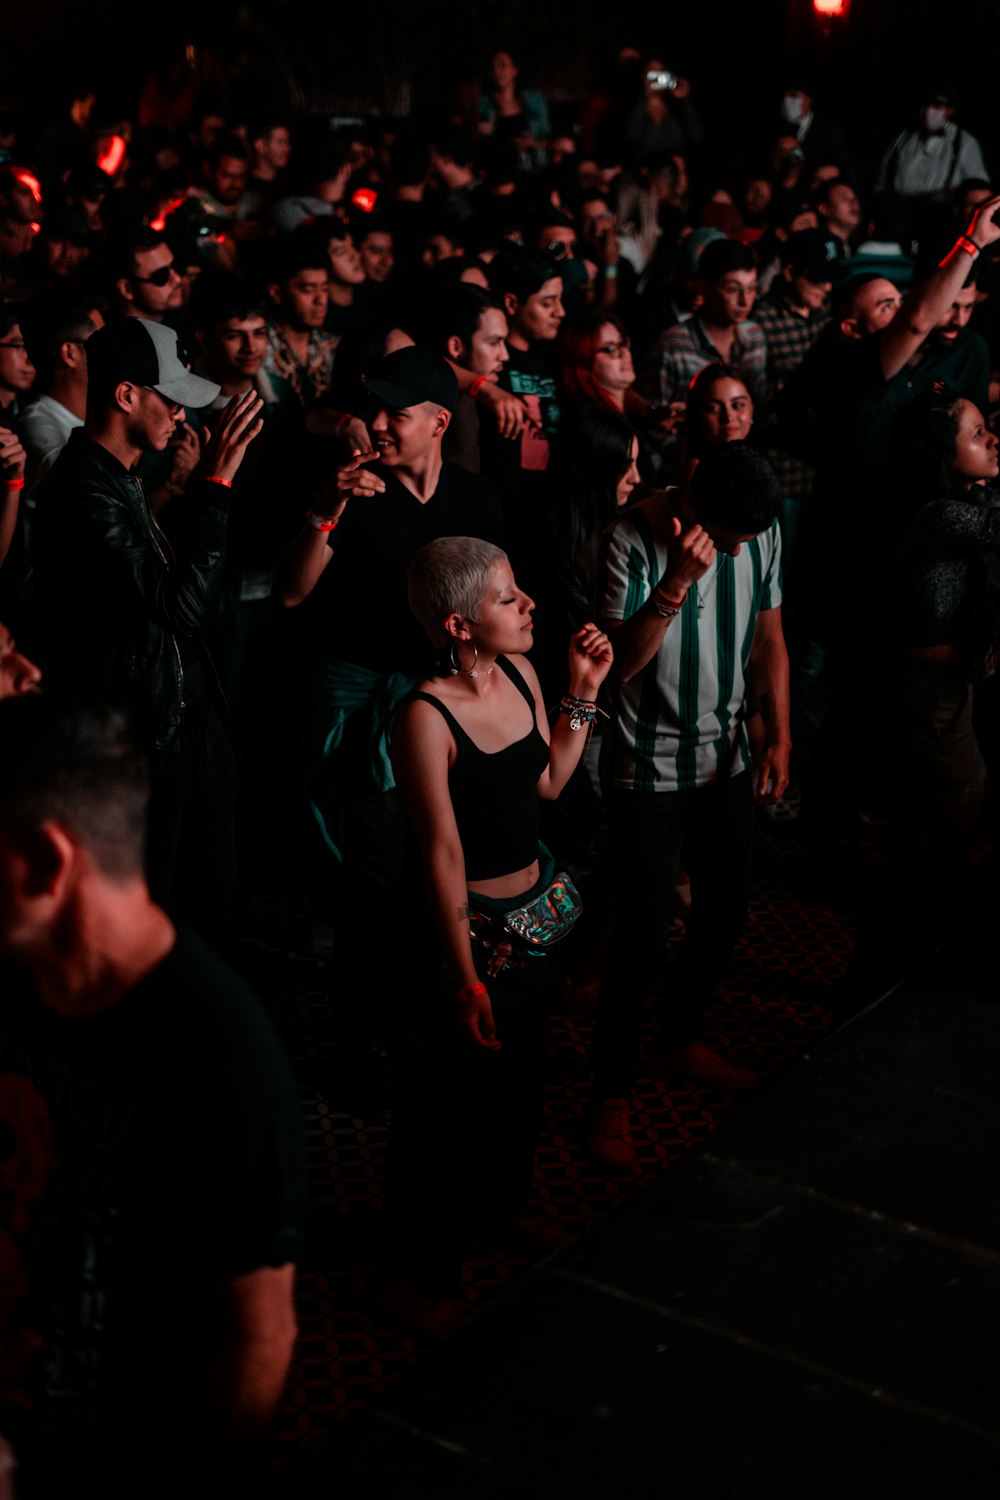 a person dancing in a crowd